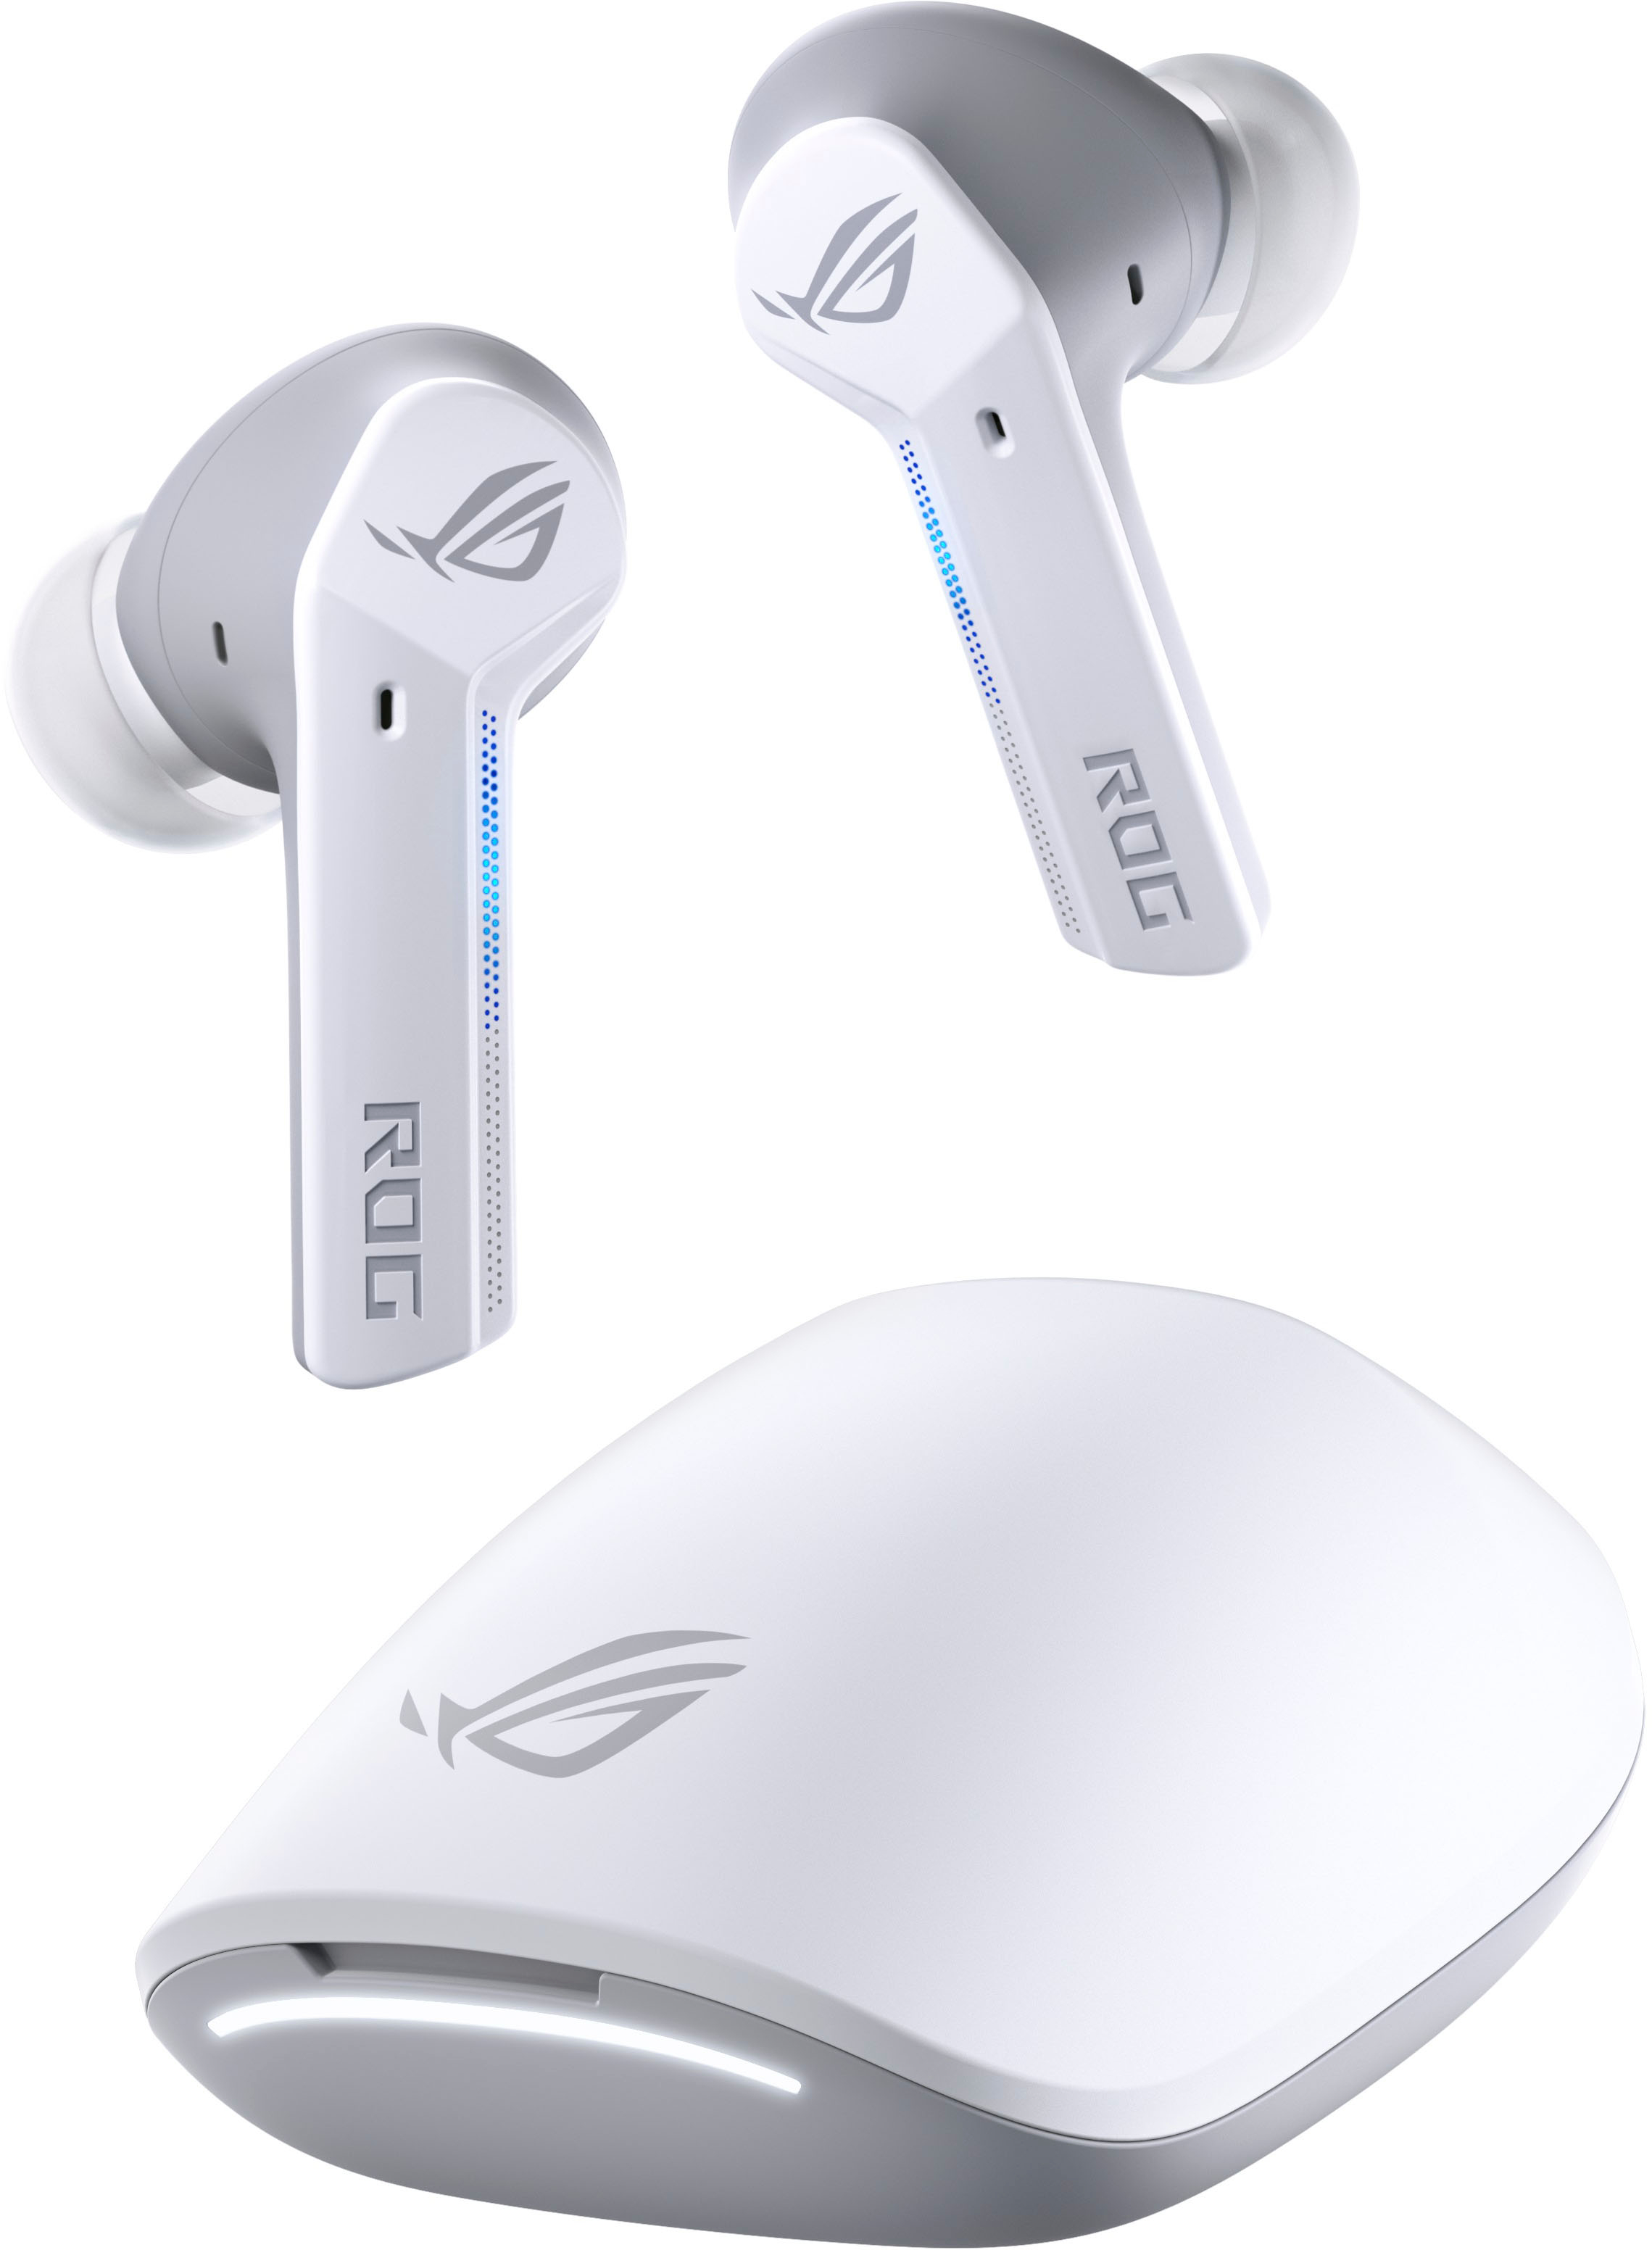 Angle View: ASUS - ROG CETRA True Wireless In-Ear Gaming Earbuds - White